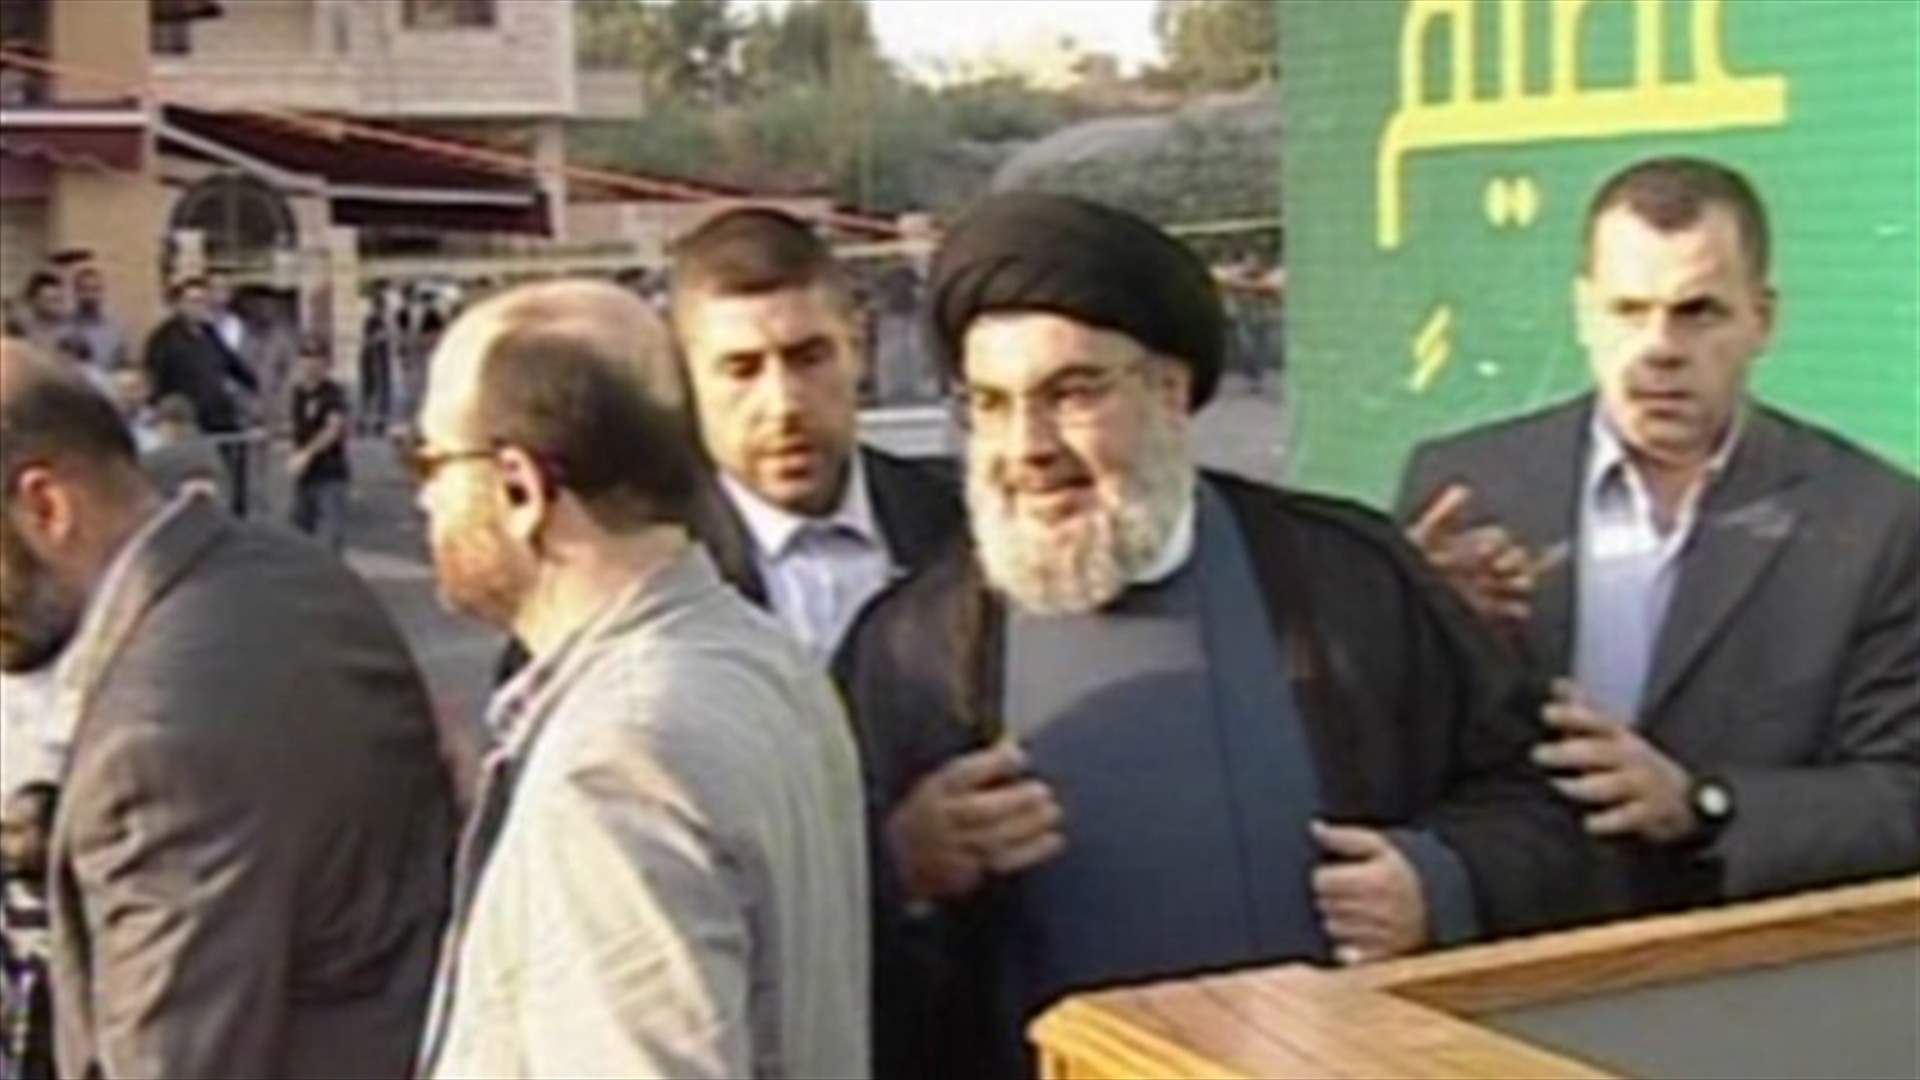 Nasrallah appears in person at the anti-Islam film protest in Beirut 